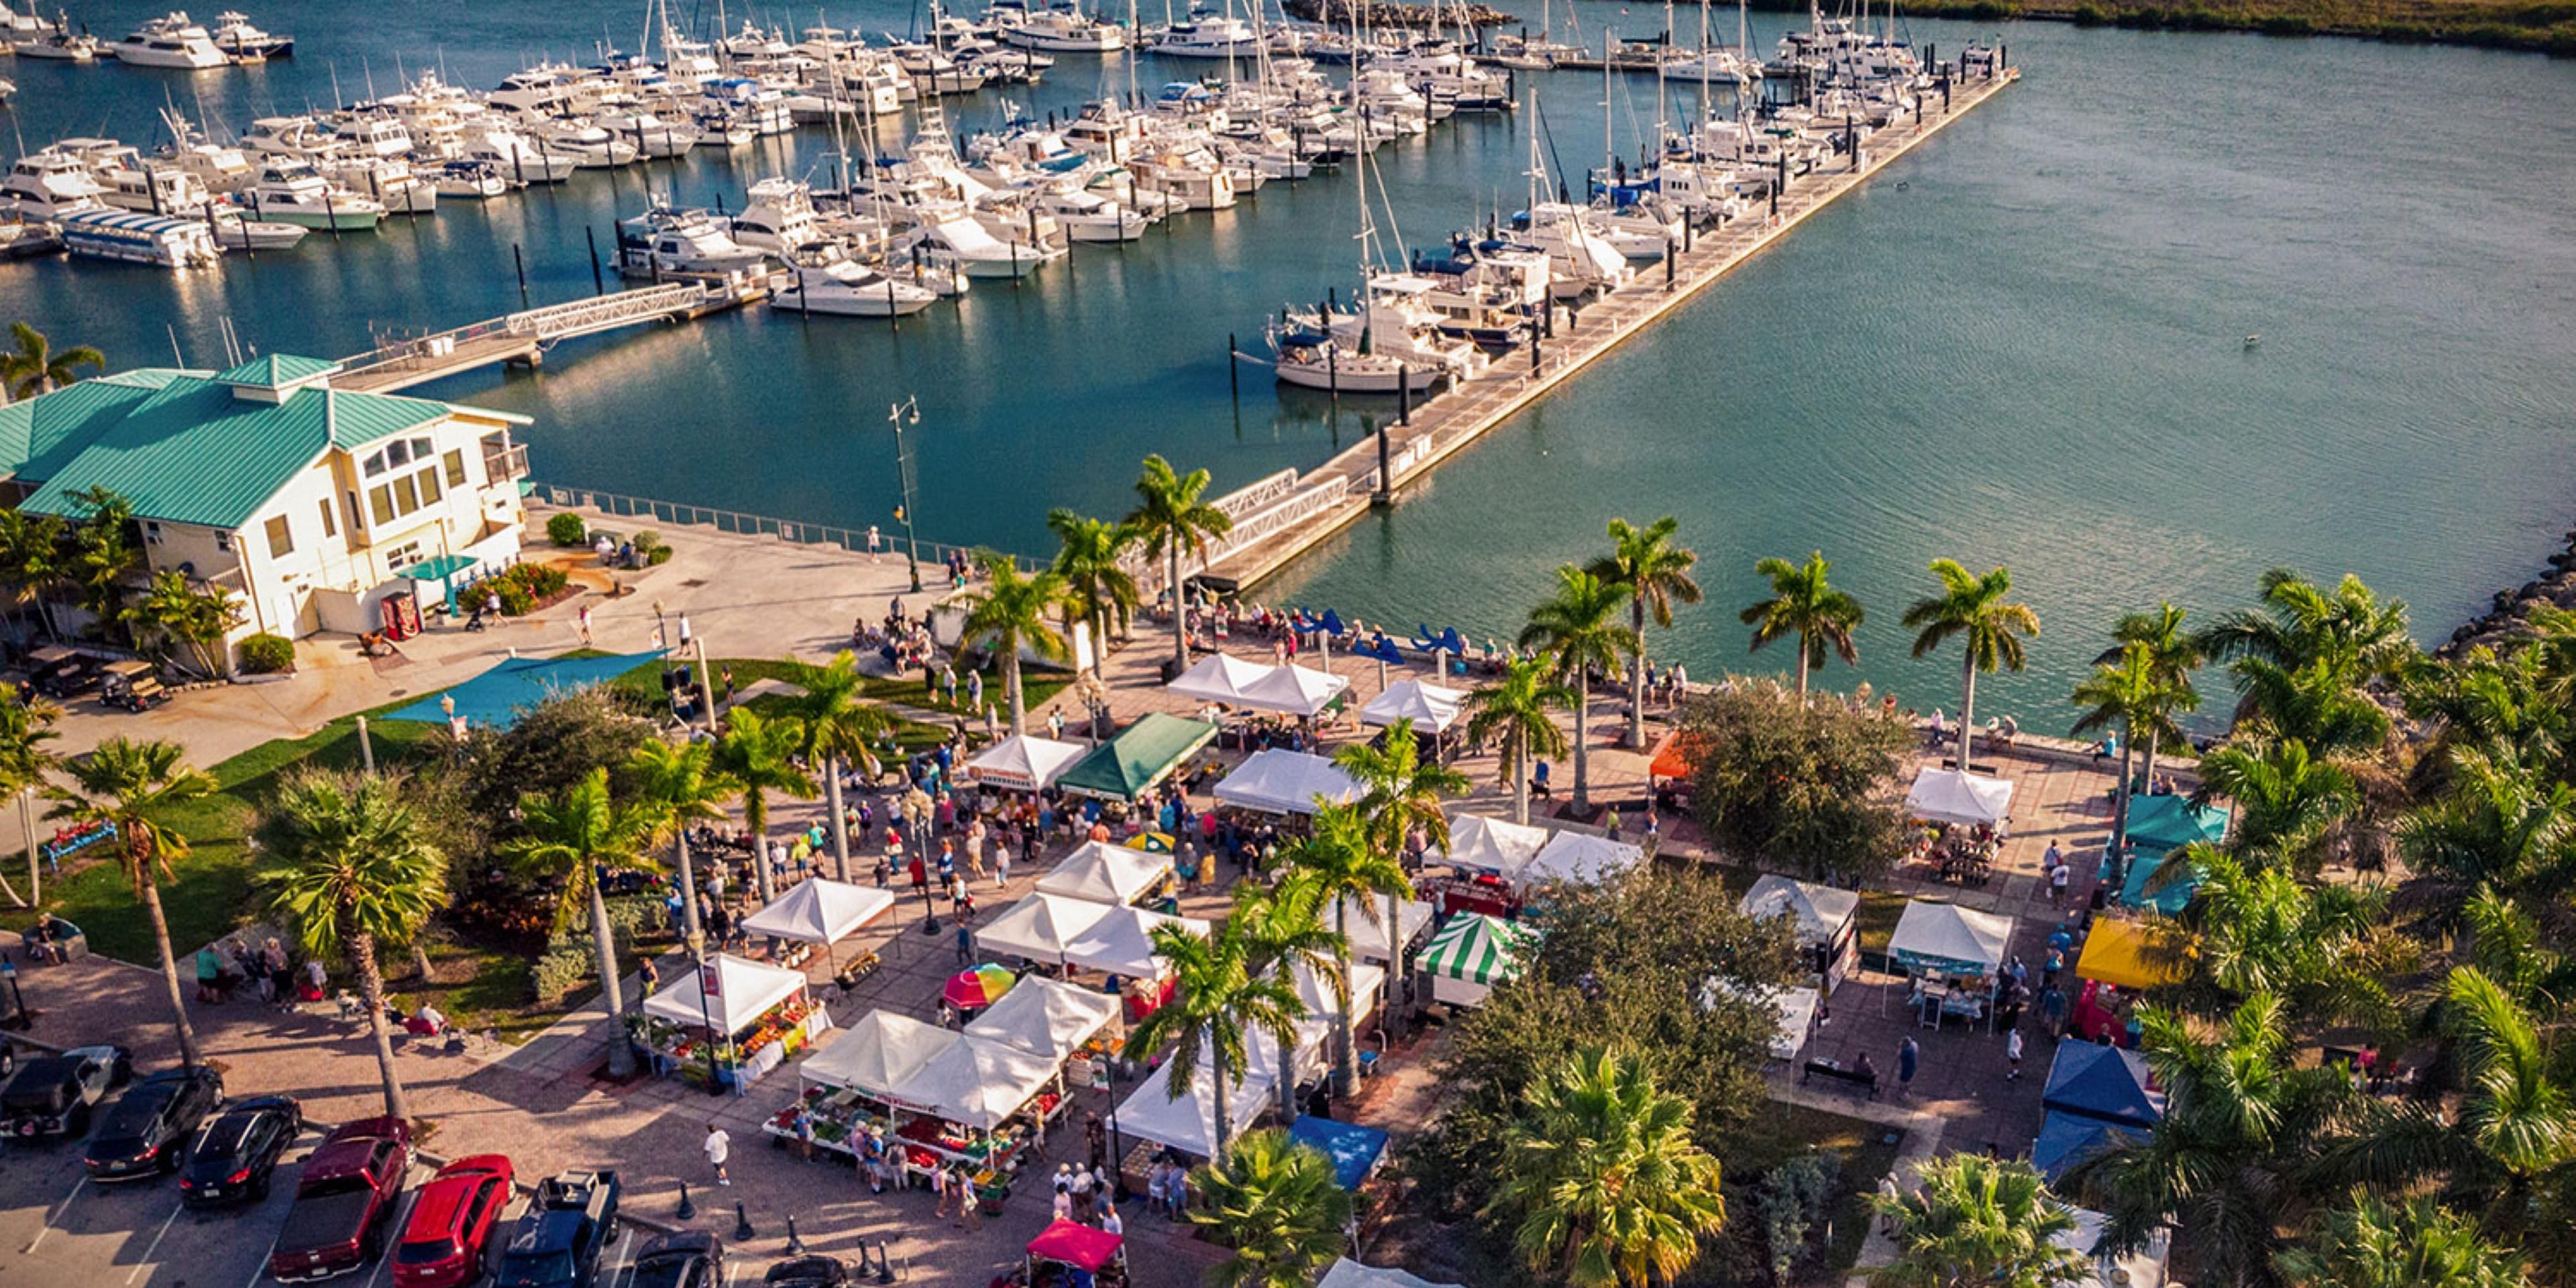 Enjoy the extraordinary Downtown Fort Pierce Farmers’ Market where over 70 friendly vendors offer a wonderful and diverse selection of delicious foods, exotic plants, savory spices, and so much more! Bring the whole family to the Downtown Fort Pierce Farmers’ Market EVERY Saturday, 8am until 12pm (rain or shine).